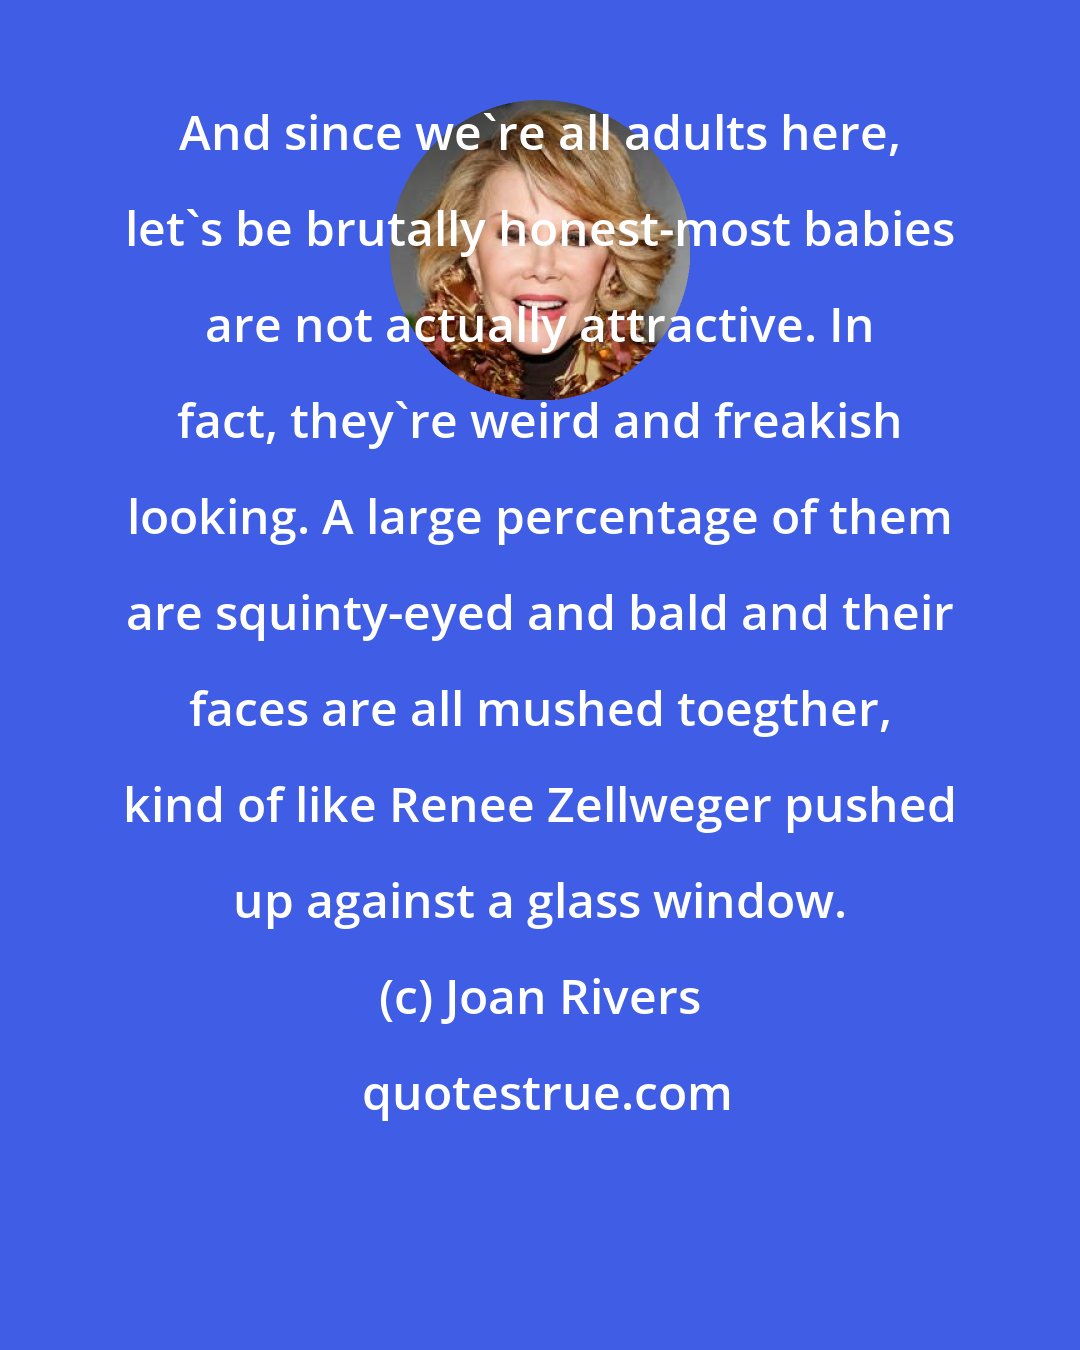 Joan Rivers: And since we're all adults here, let's be brutally honest-most babies are not actually attractive. In fact, they're weird and freakish looking. A large percentage of them are squinty-eyed and bald and their faces are all mushed toegther, kind of like Renee Zellweger pushed up against a glass window.